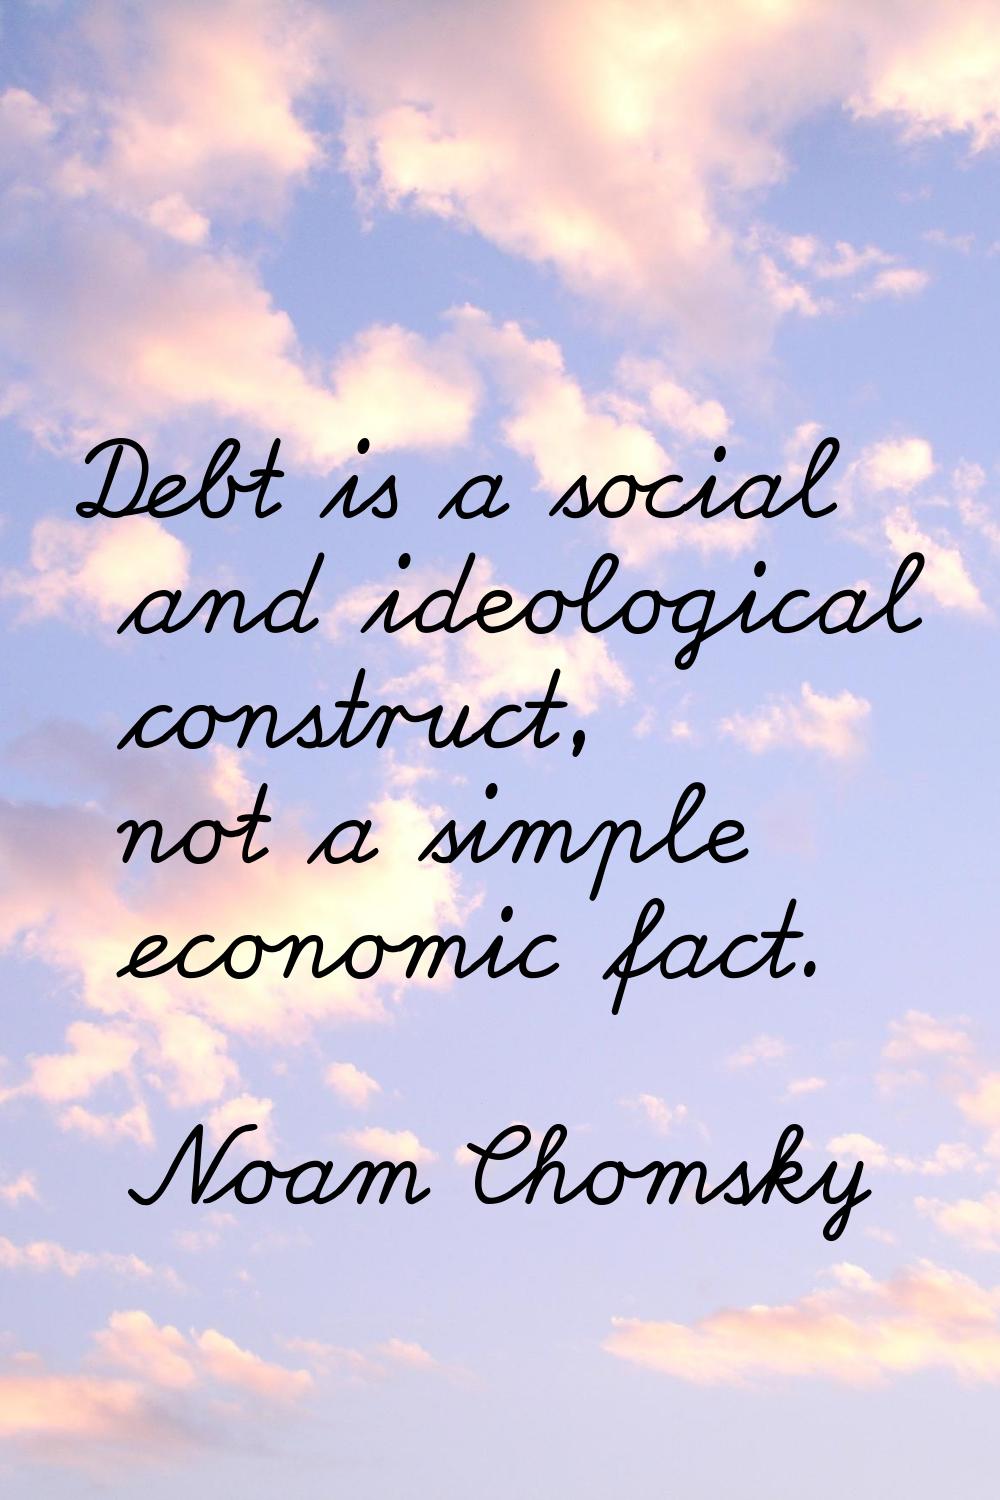 Debt is a social and ideological construct, not a simple economic fact.